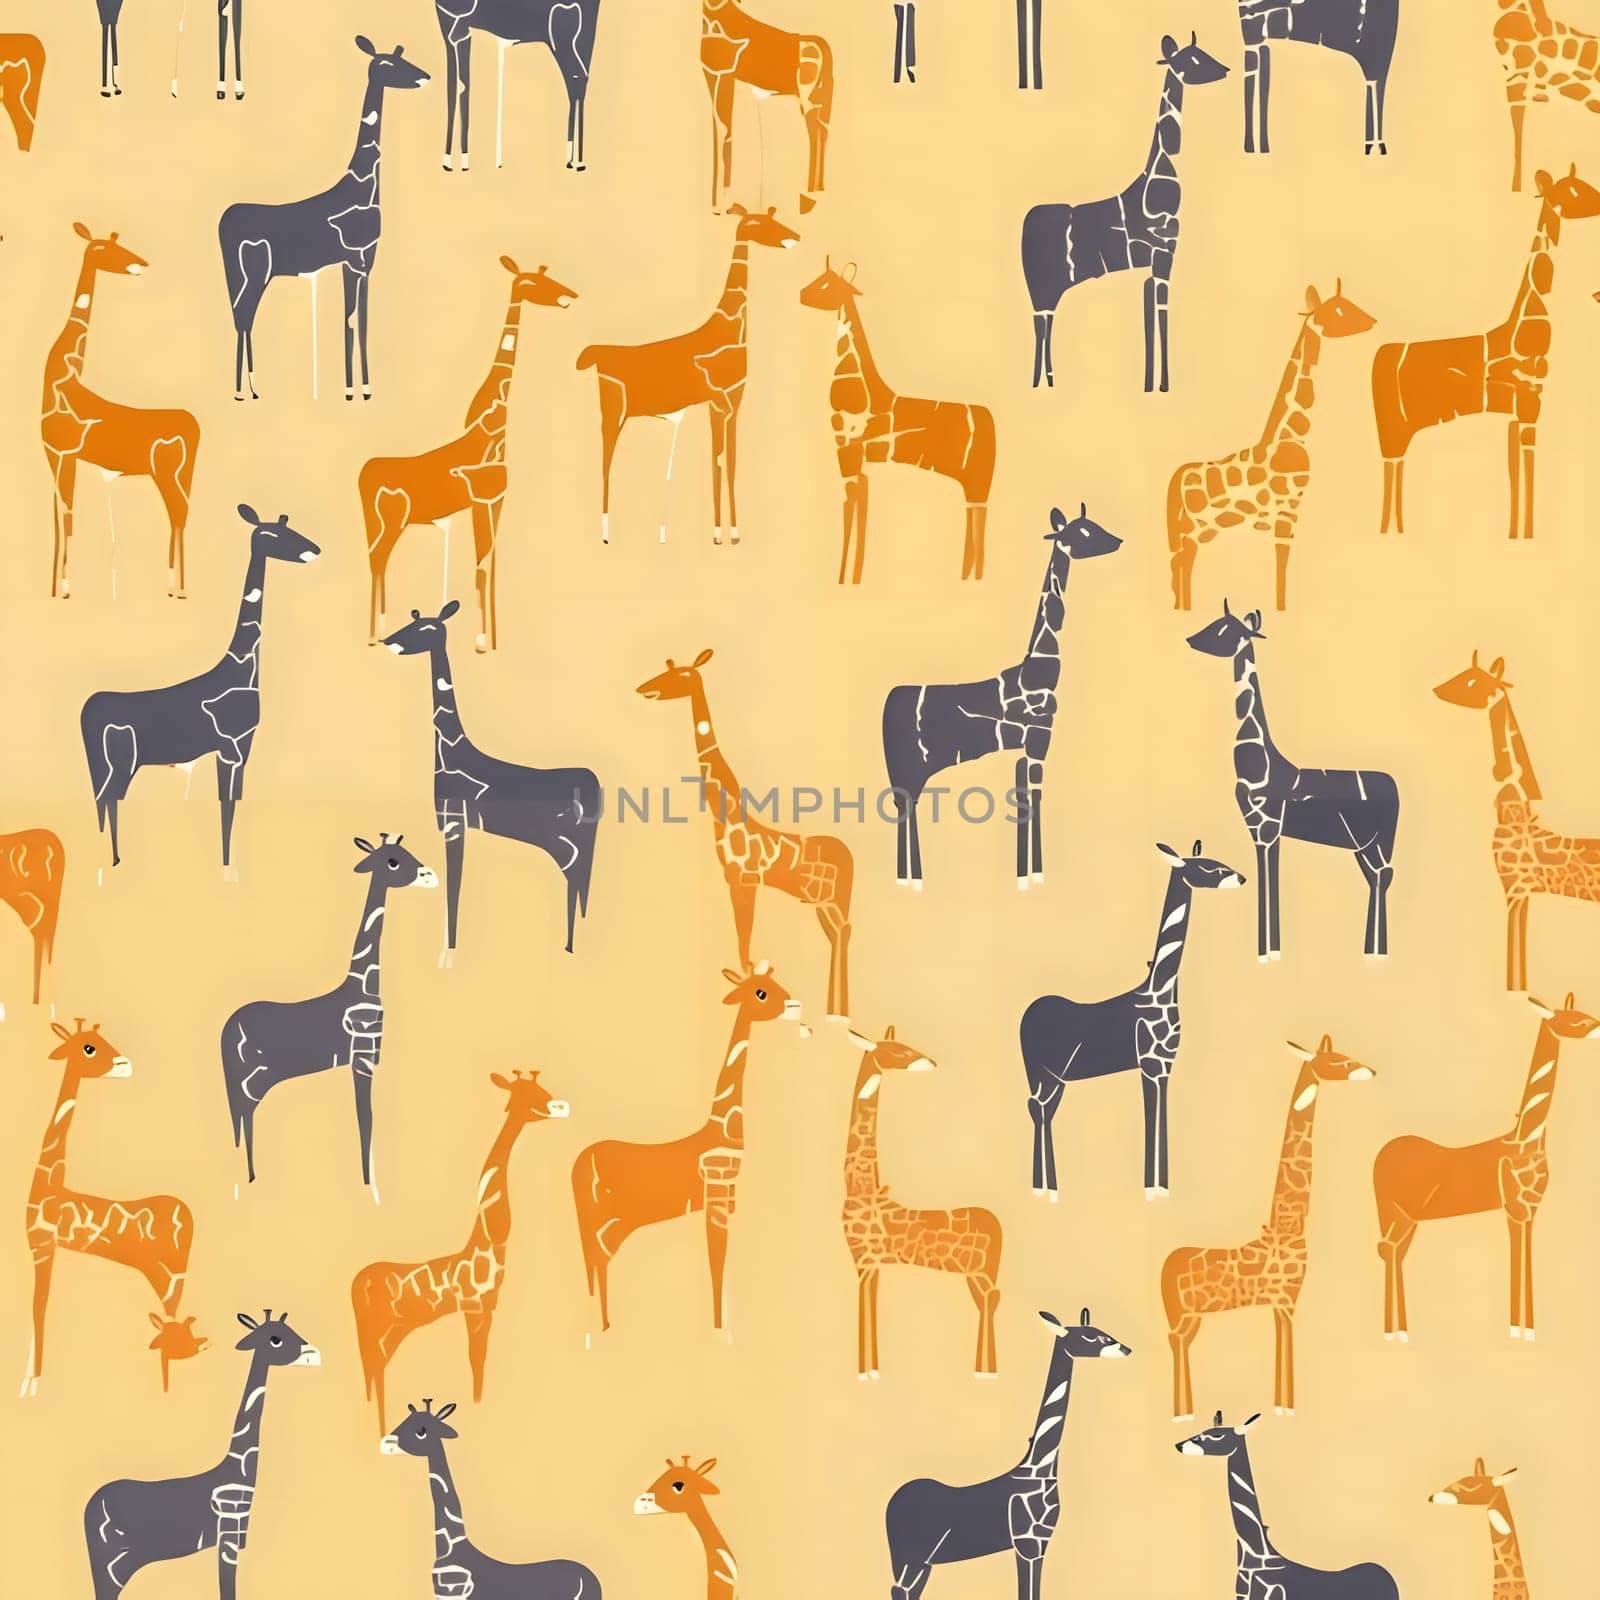 Patterns and banners backgrounds: Seamless pattern with cute giraffes on yellow background.